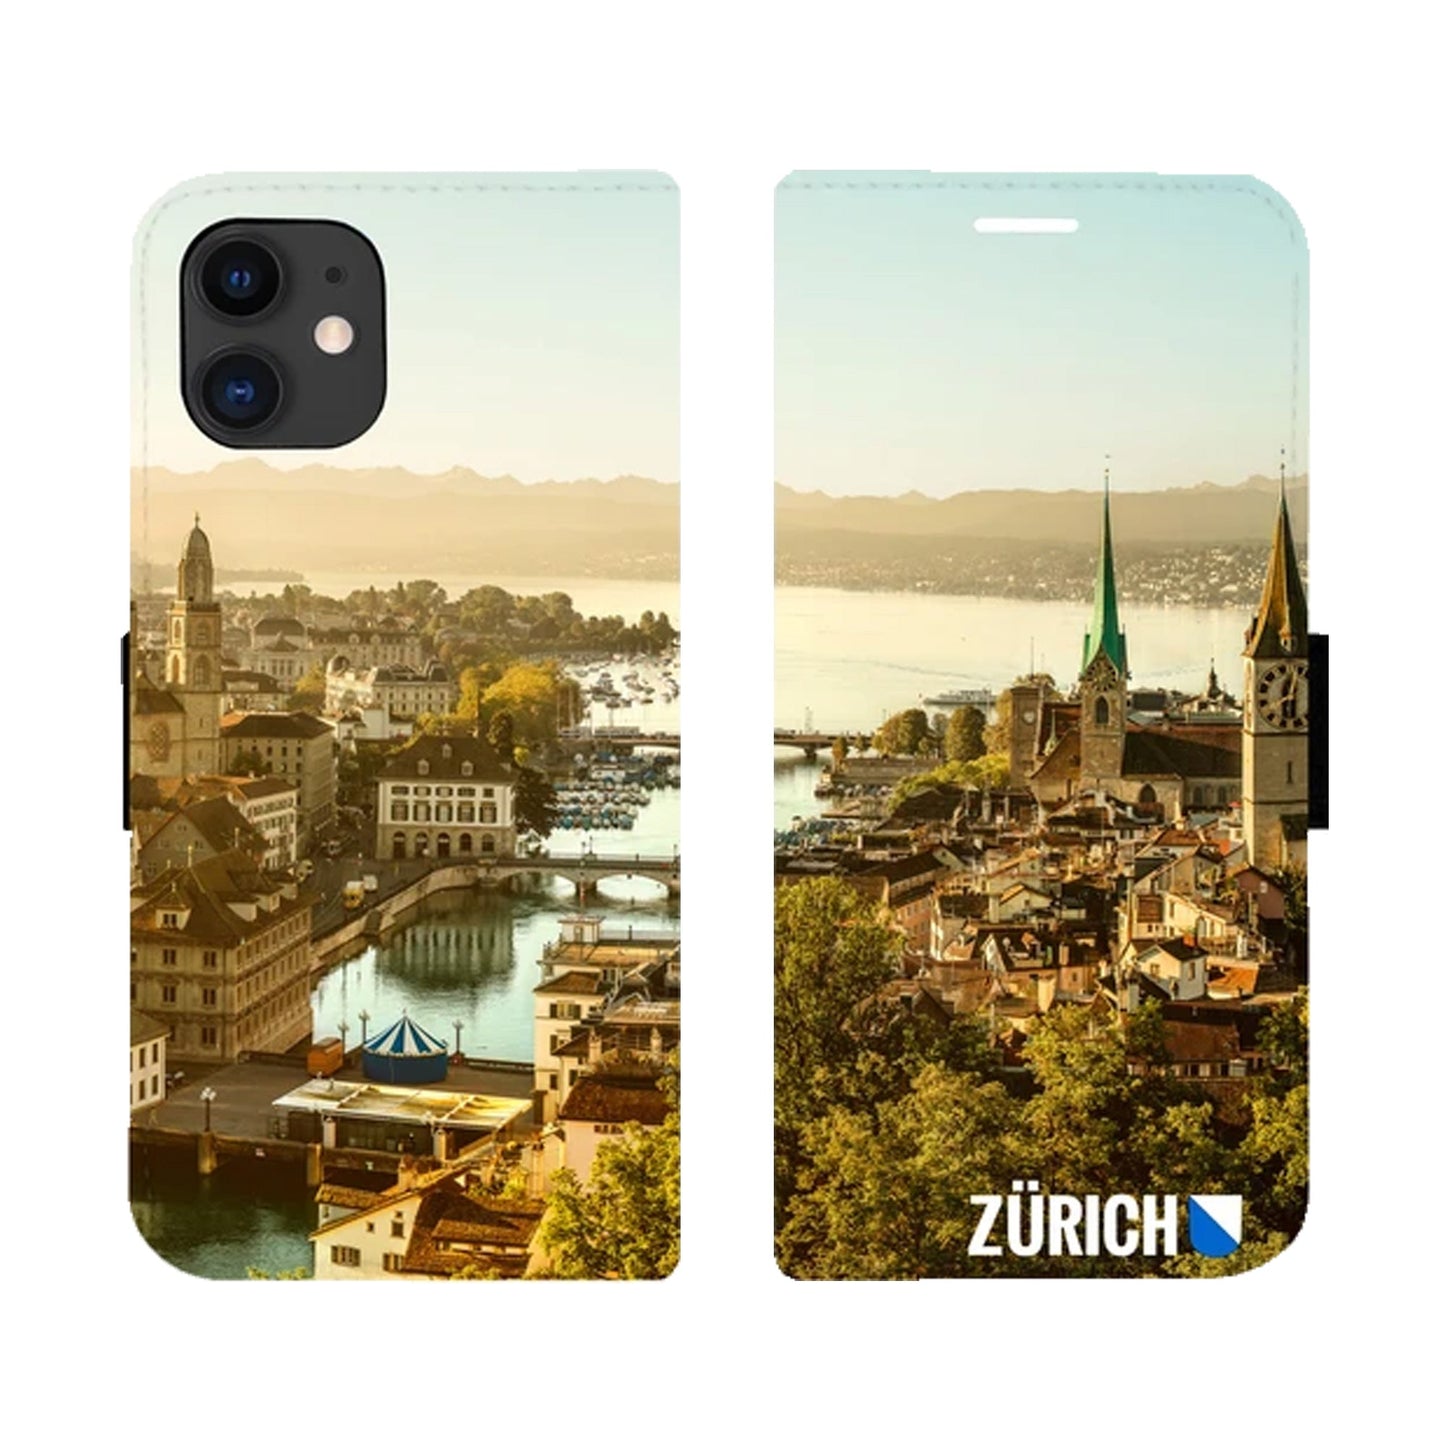 Zurich City from Above Victor Case for iPhone 11 